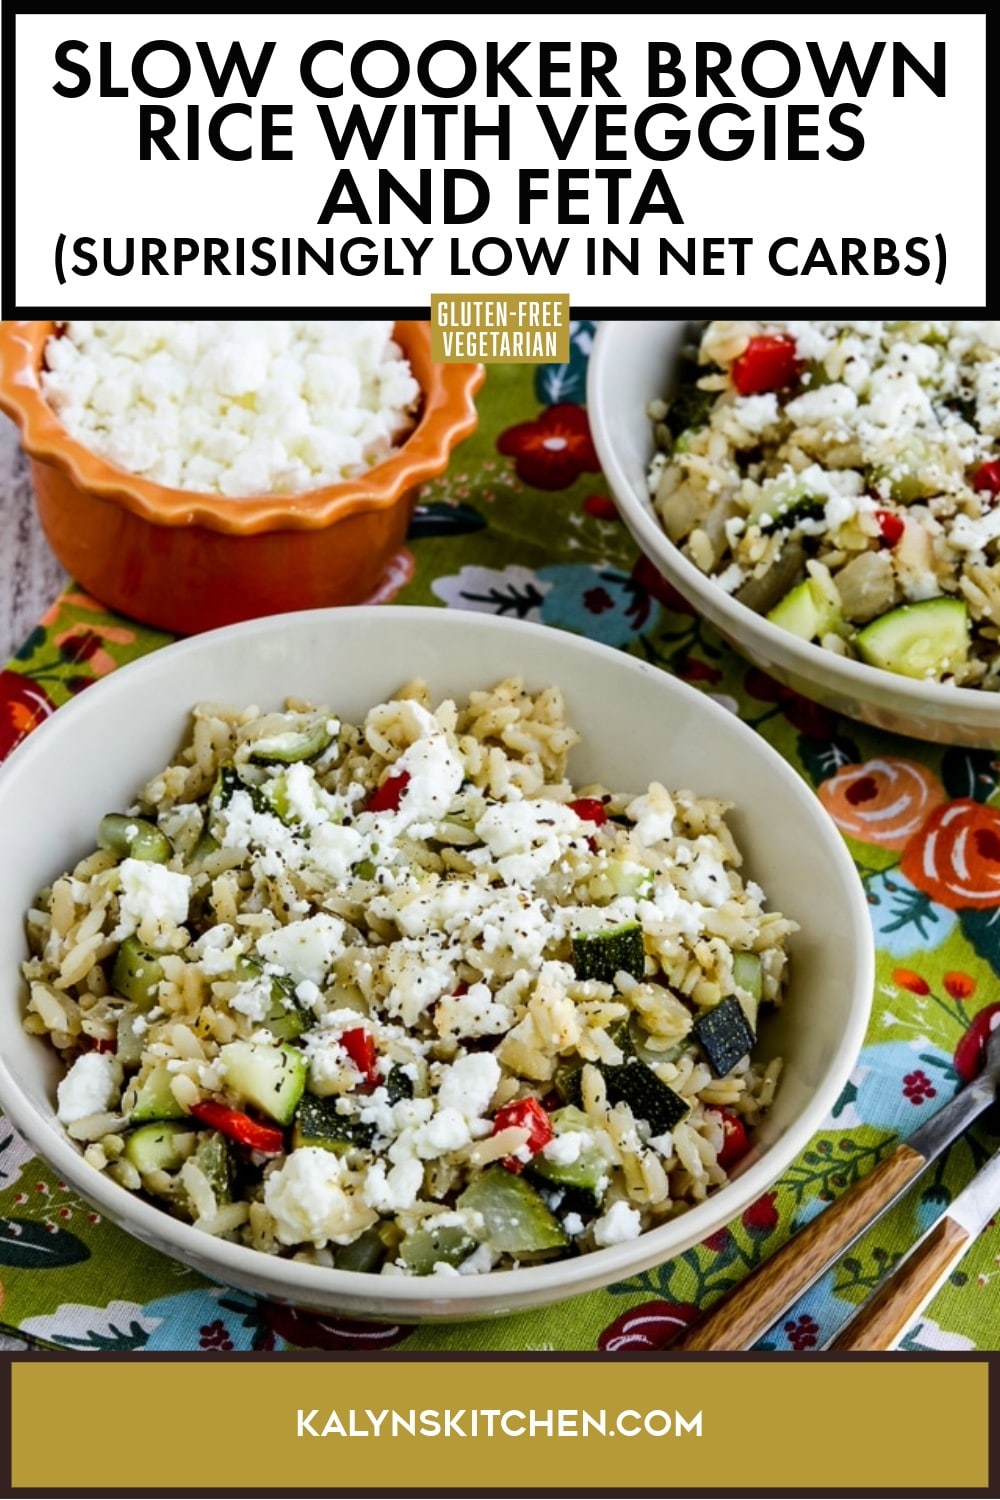 Pinterest image of Slow Cooker Brown Rice with Veggies and Feta